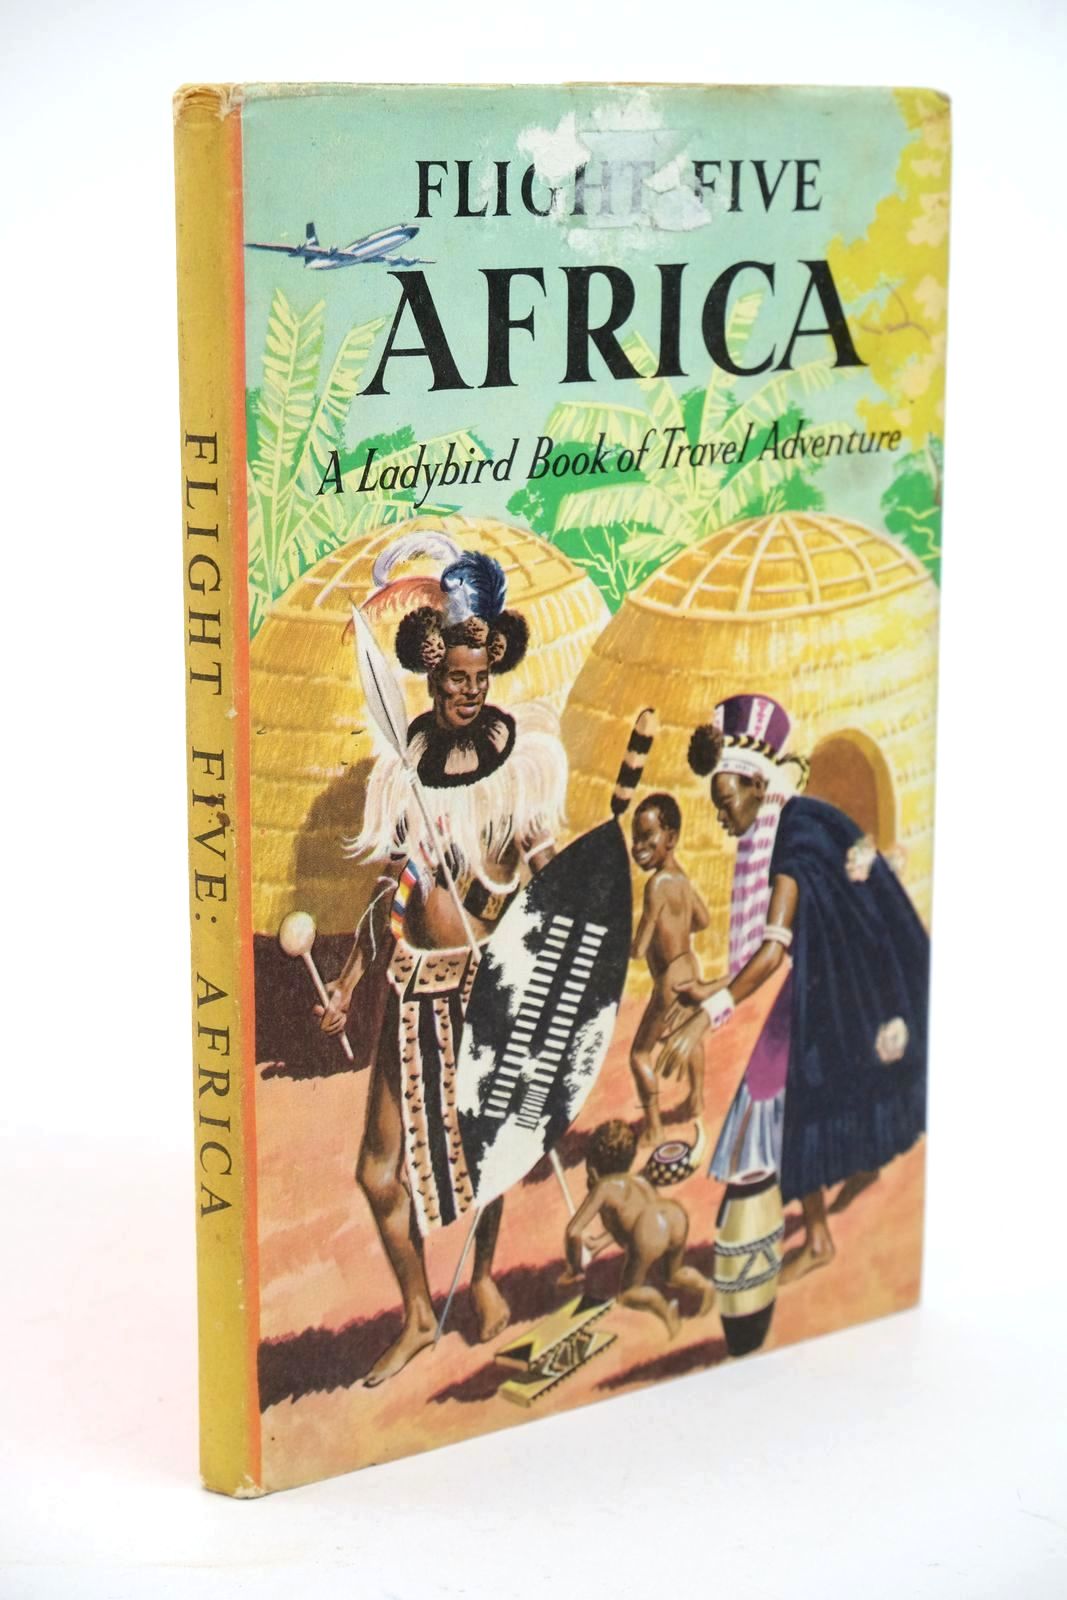 Photo of FLIGHT FIVE: AFRICA written by Daniell, David Scott illustrated by Matthew, Jack published by Wills &amp; Hepworth Ltd. (STOCK CODE: 1323153)  for sale by Stella & Rose's Books